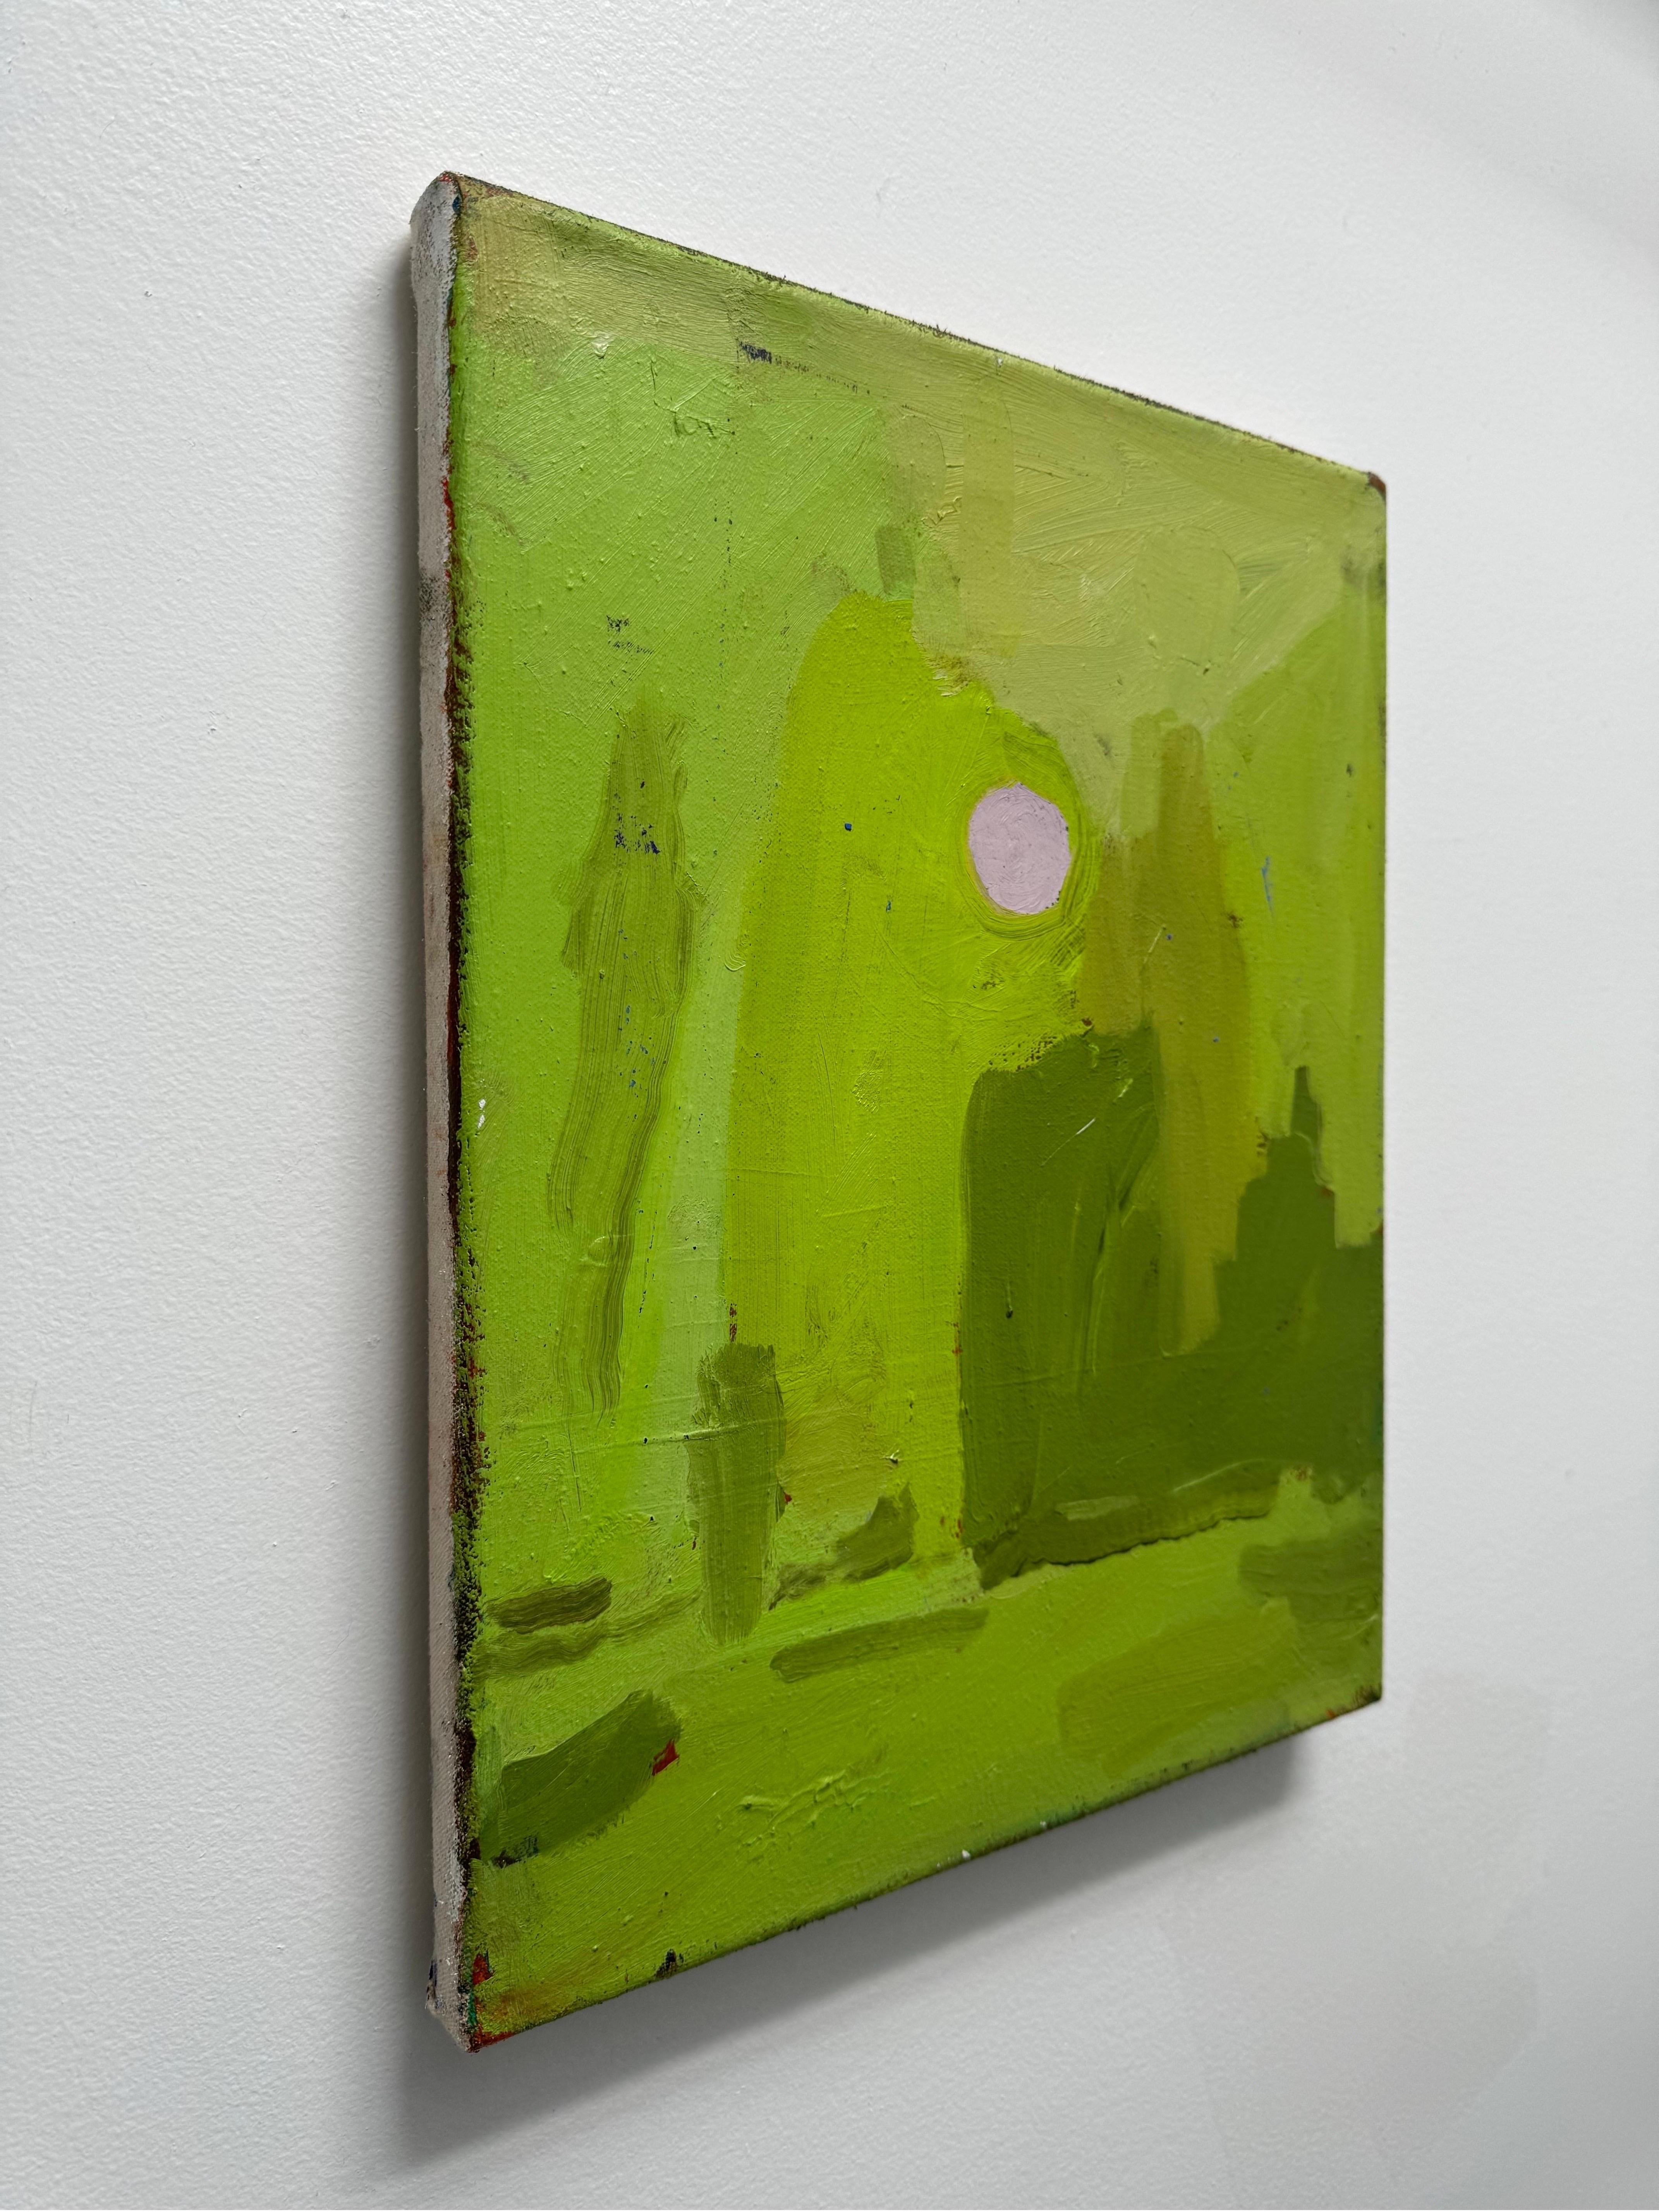 The Greenest Of Pastures, Contemporary Landscape Painting by Matt Higgins 2